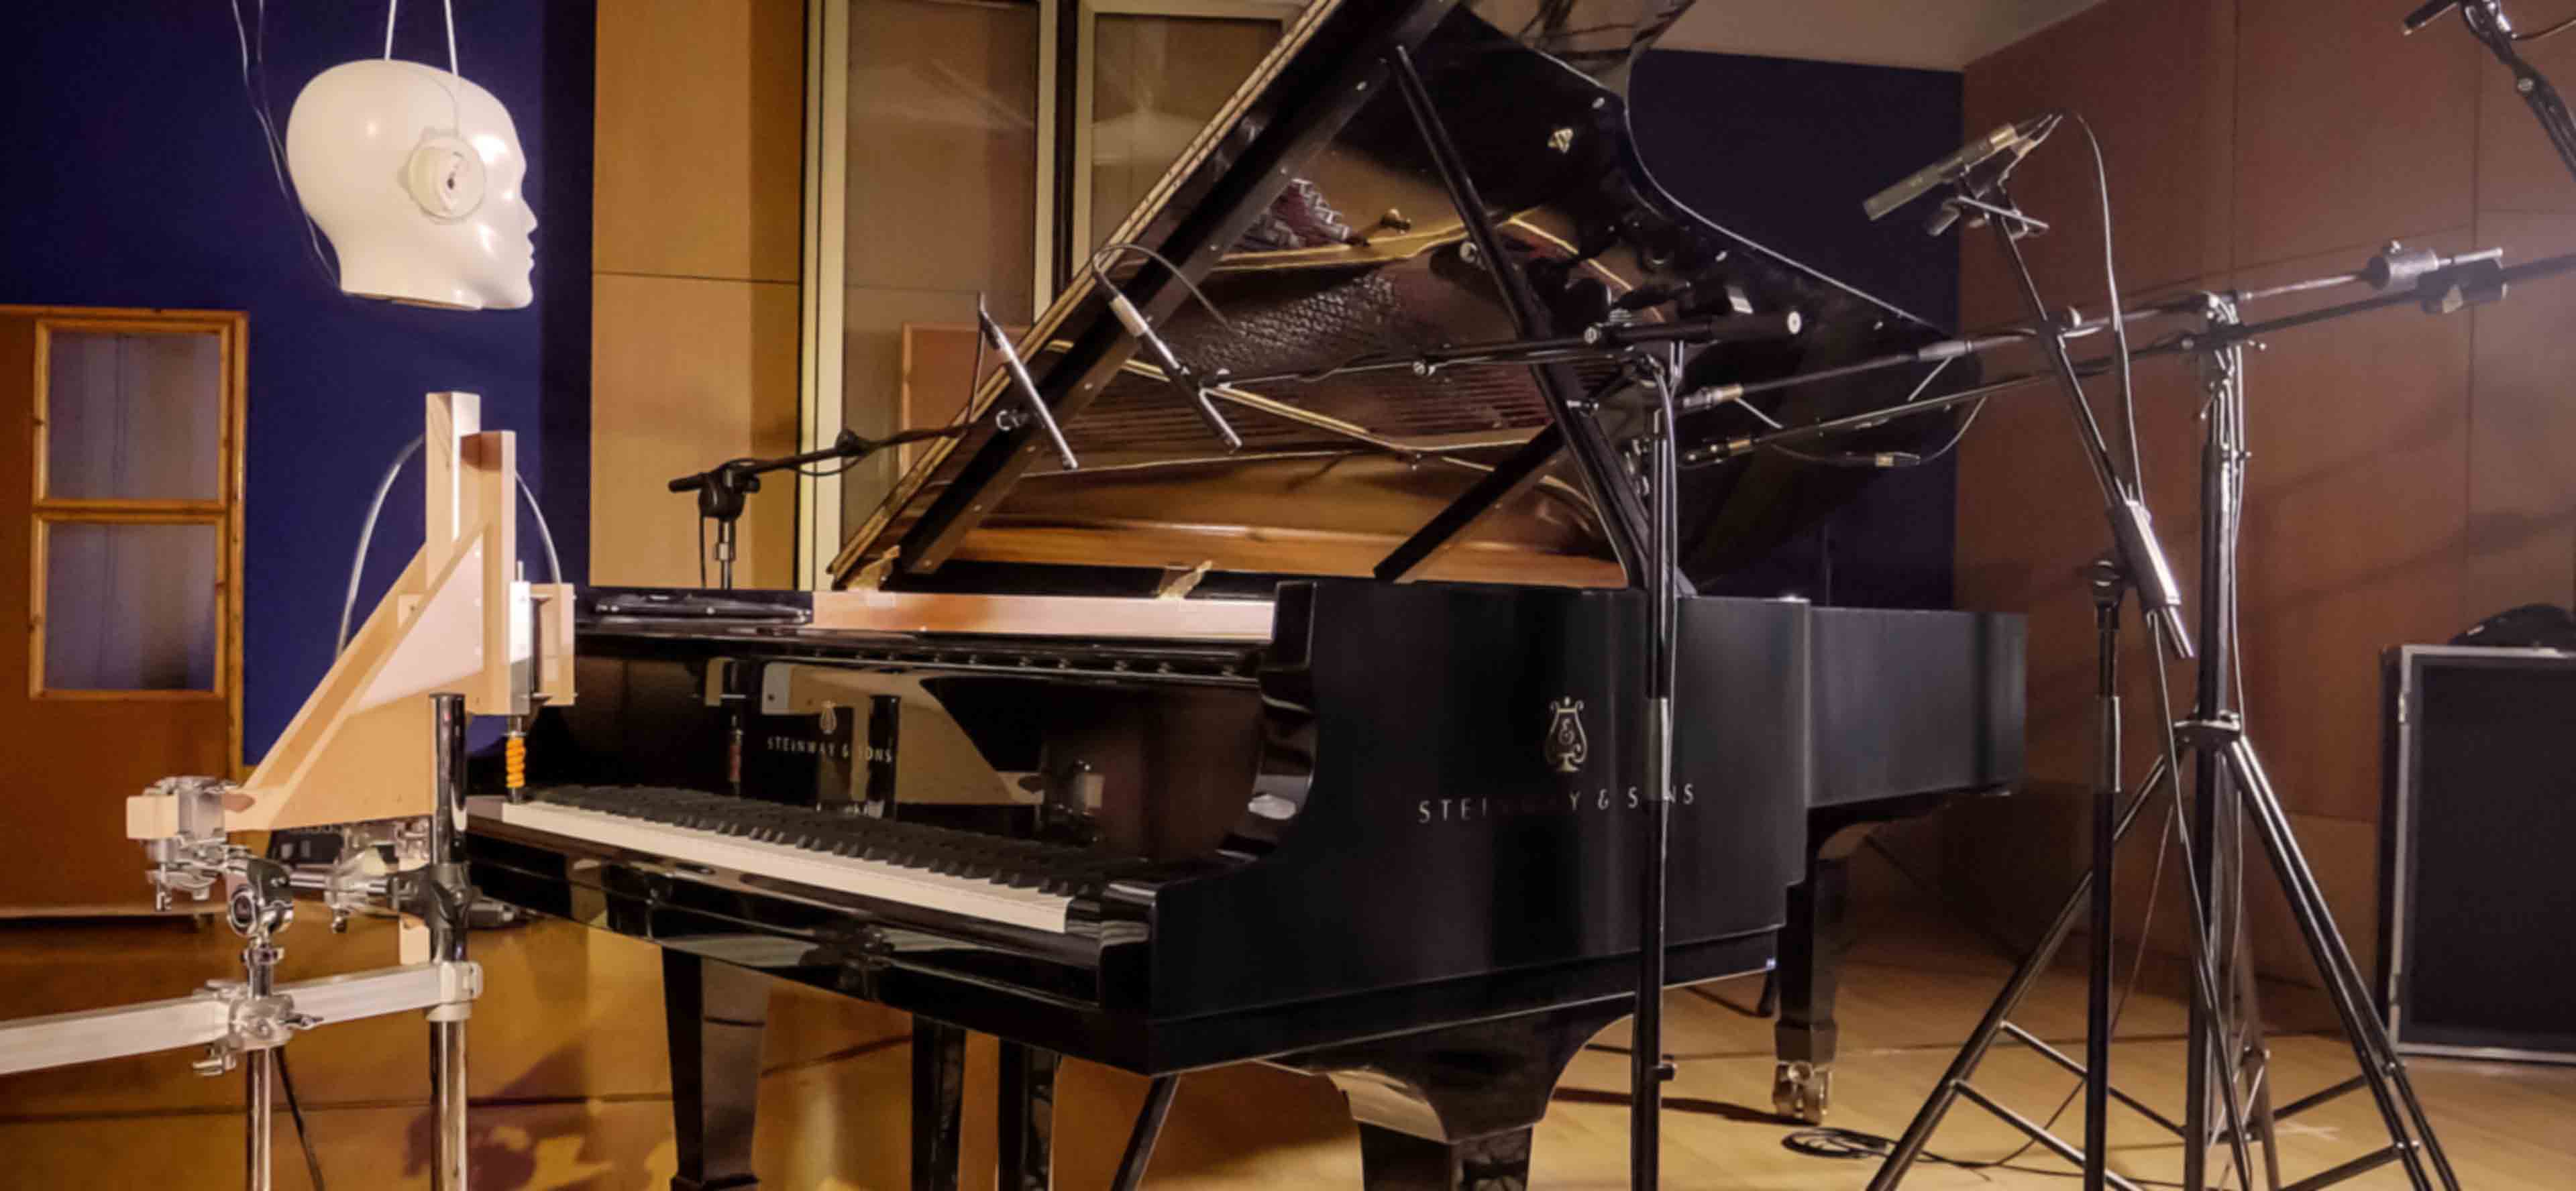 Robot-assisted sampling of a Steinway & Sons piano